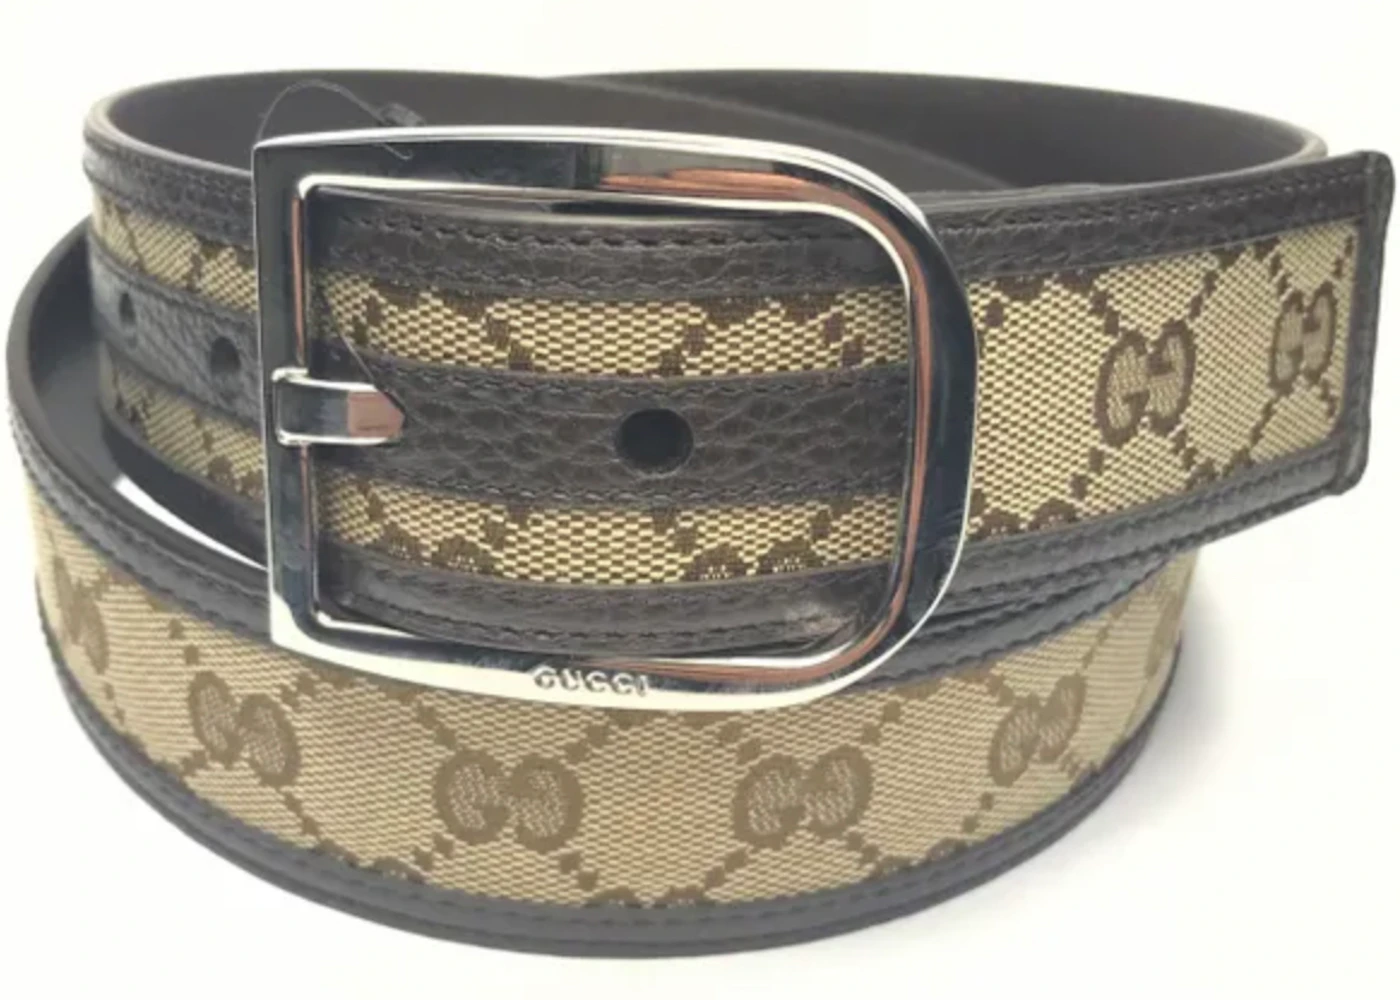 Gucci Belt GG Supreme Leather 1.5 Width Beige/Ebony in Canvas/Leather ...